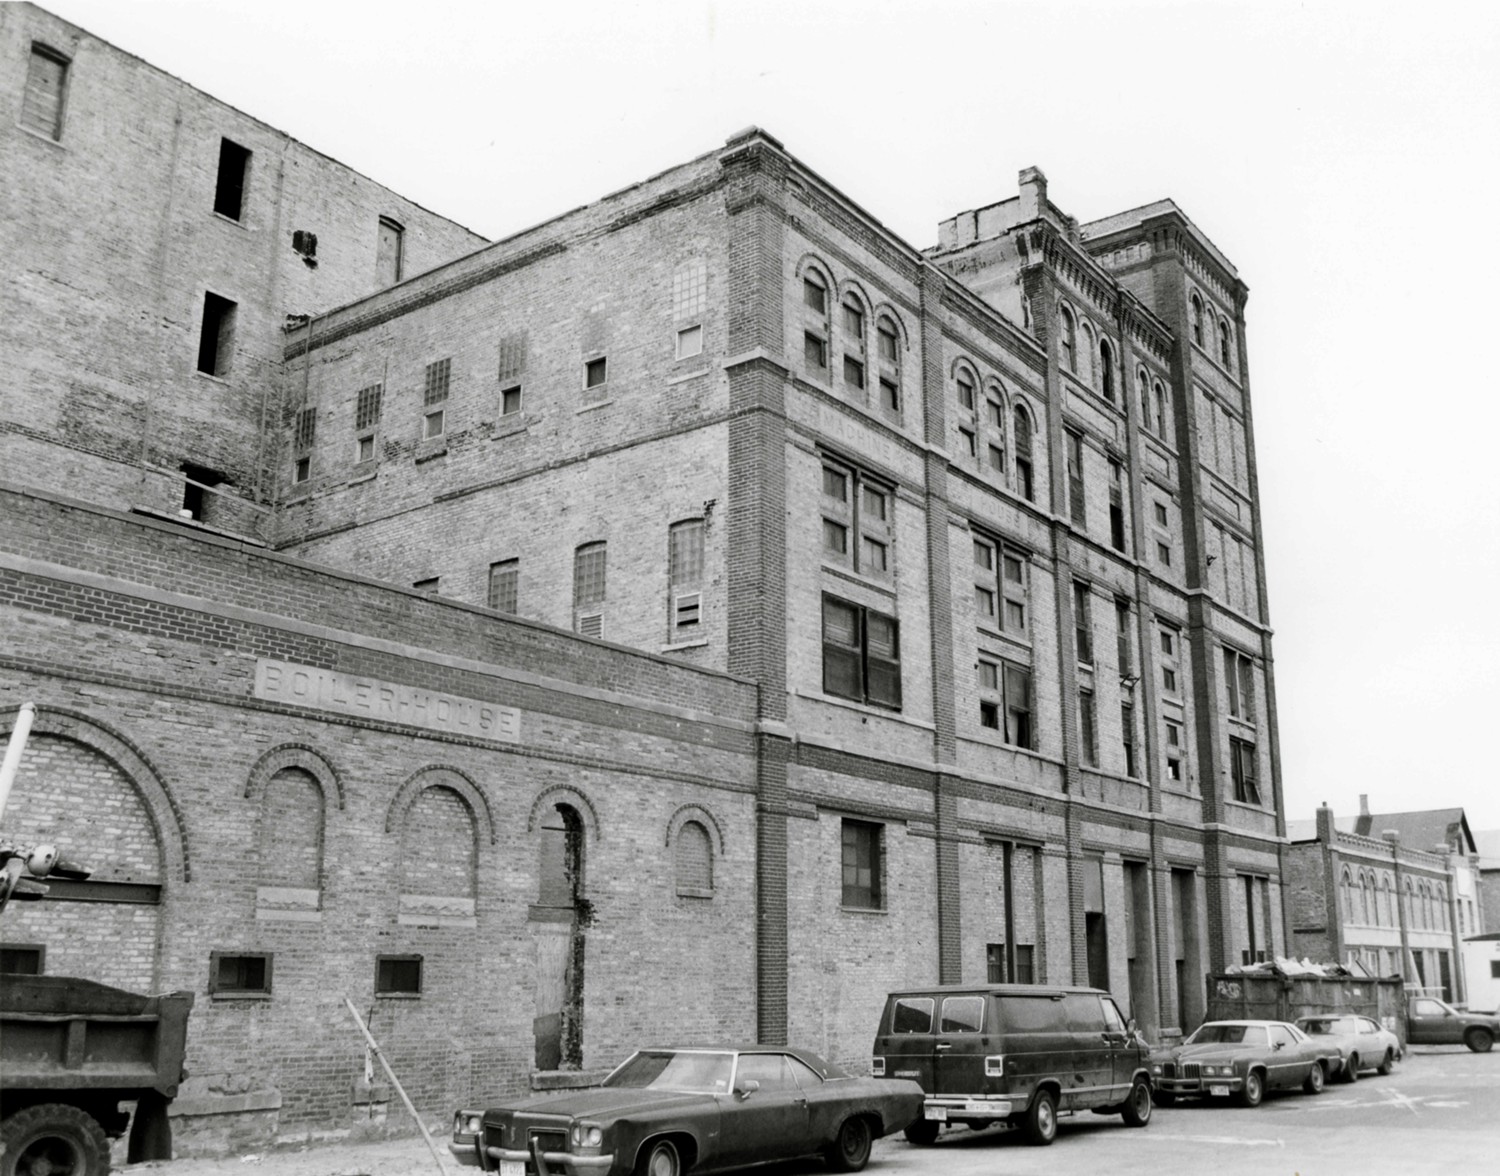 Best Brewing Company of Chicago - Best Brewery, Chicago Illinois North front facade (1987)